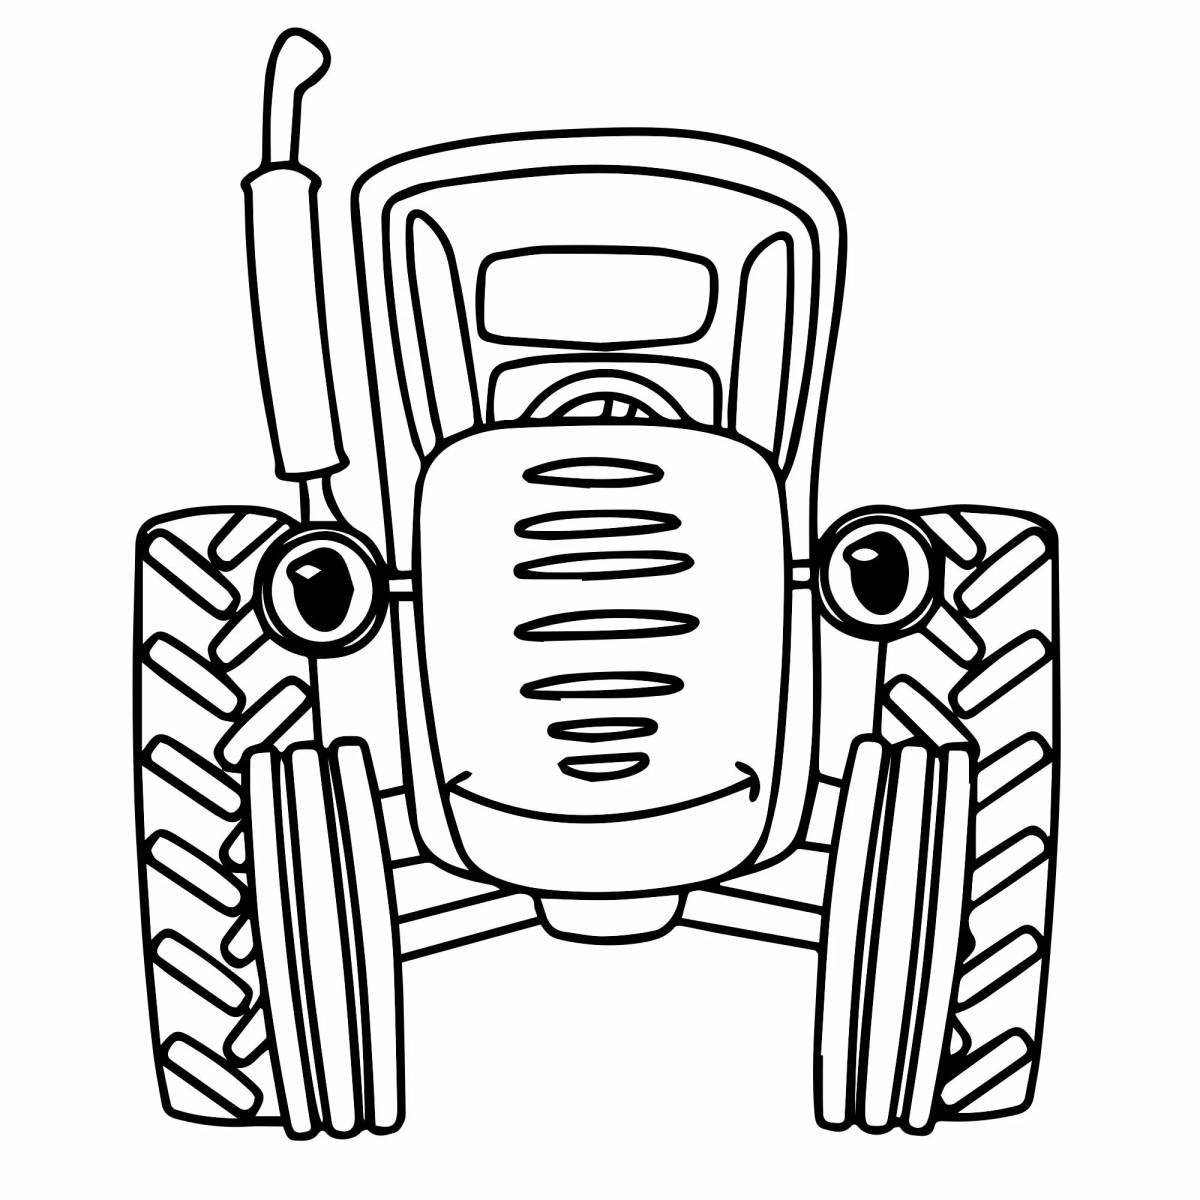 Colorful shiny tractor cartoon coloring page